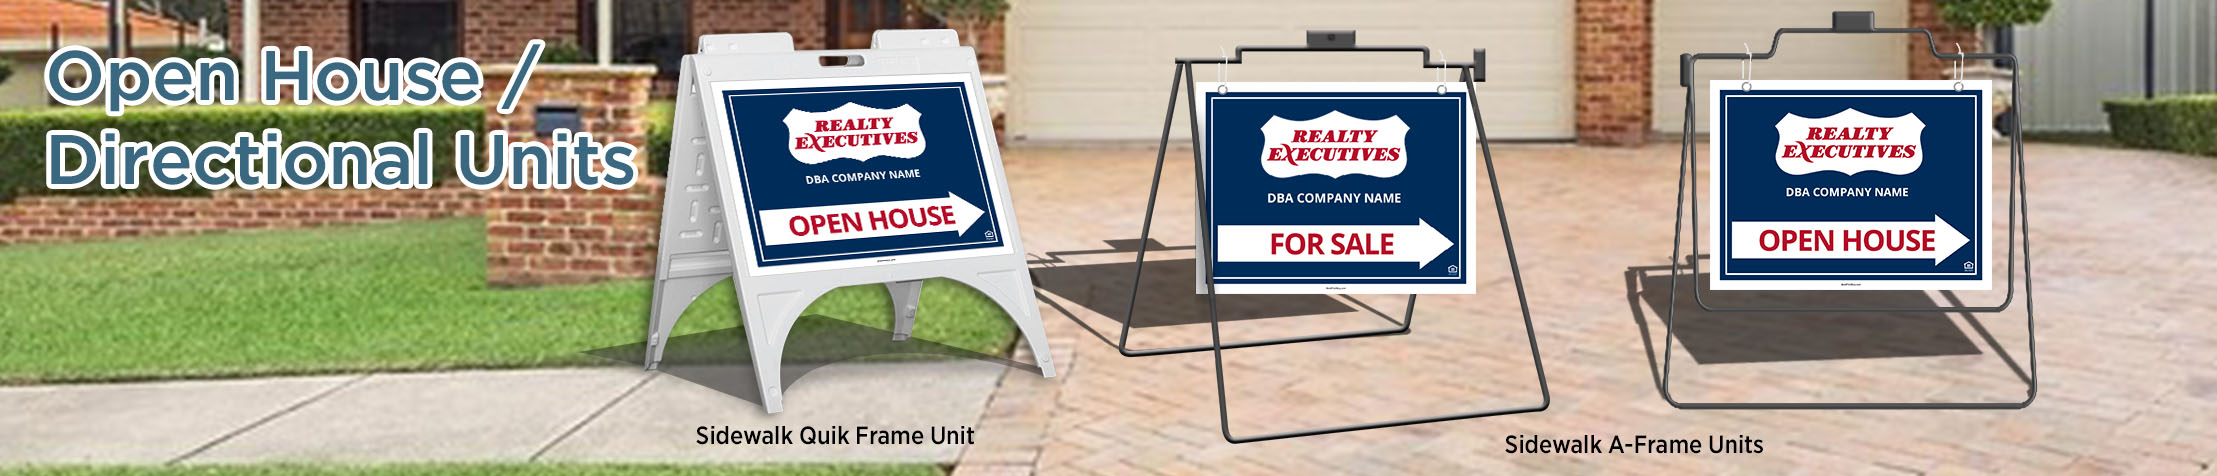 Realty Executives Real Estate Open House/Directional Units - real estate Sidewalk A-Frame signs | BestPrintBuy.com